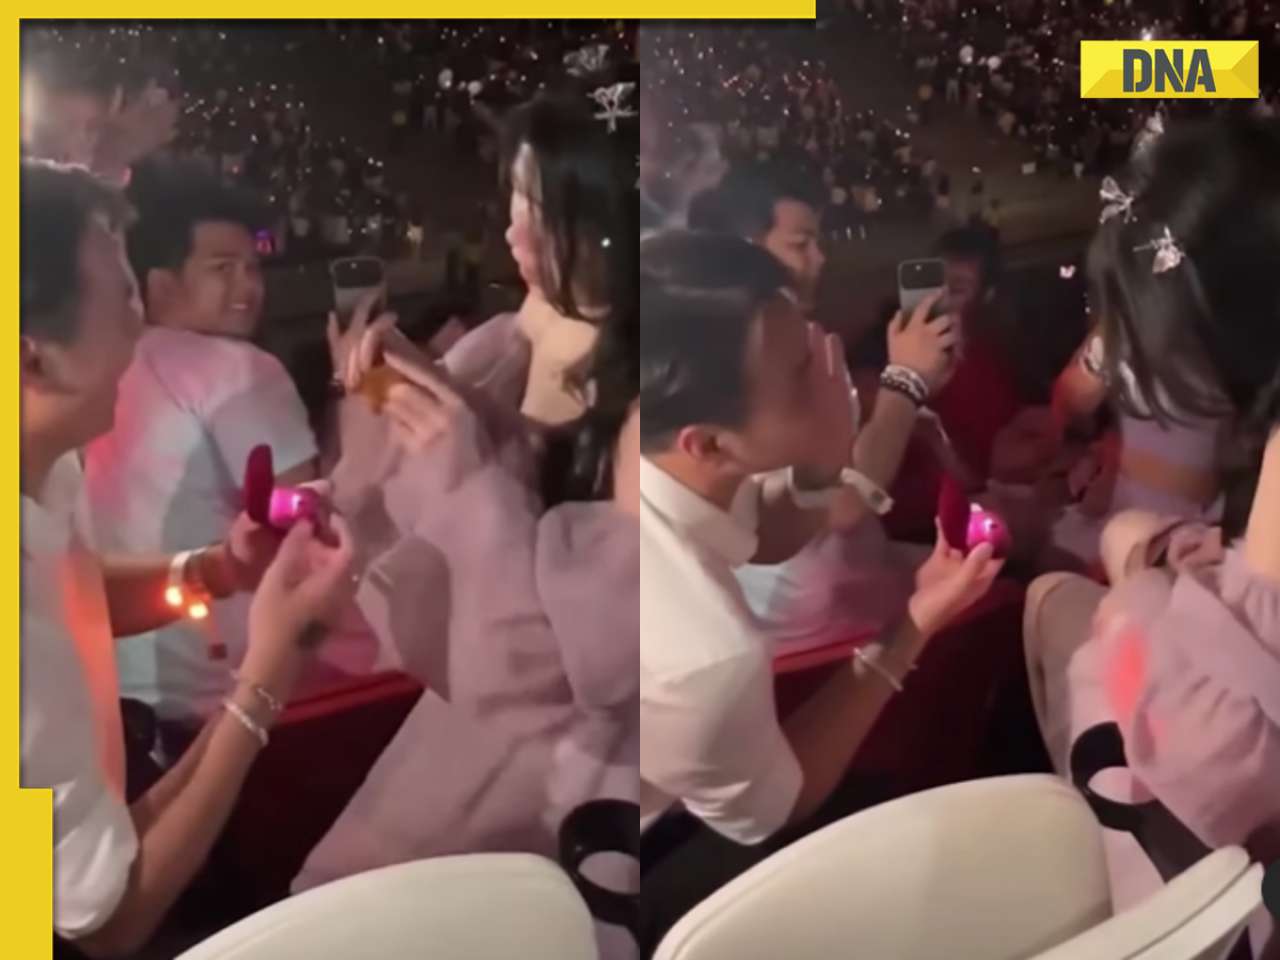 Man proposes to girlfriend at Taylor Swift's concert, viral video shows what happens next